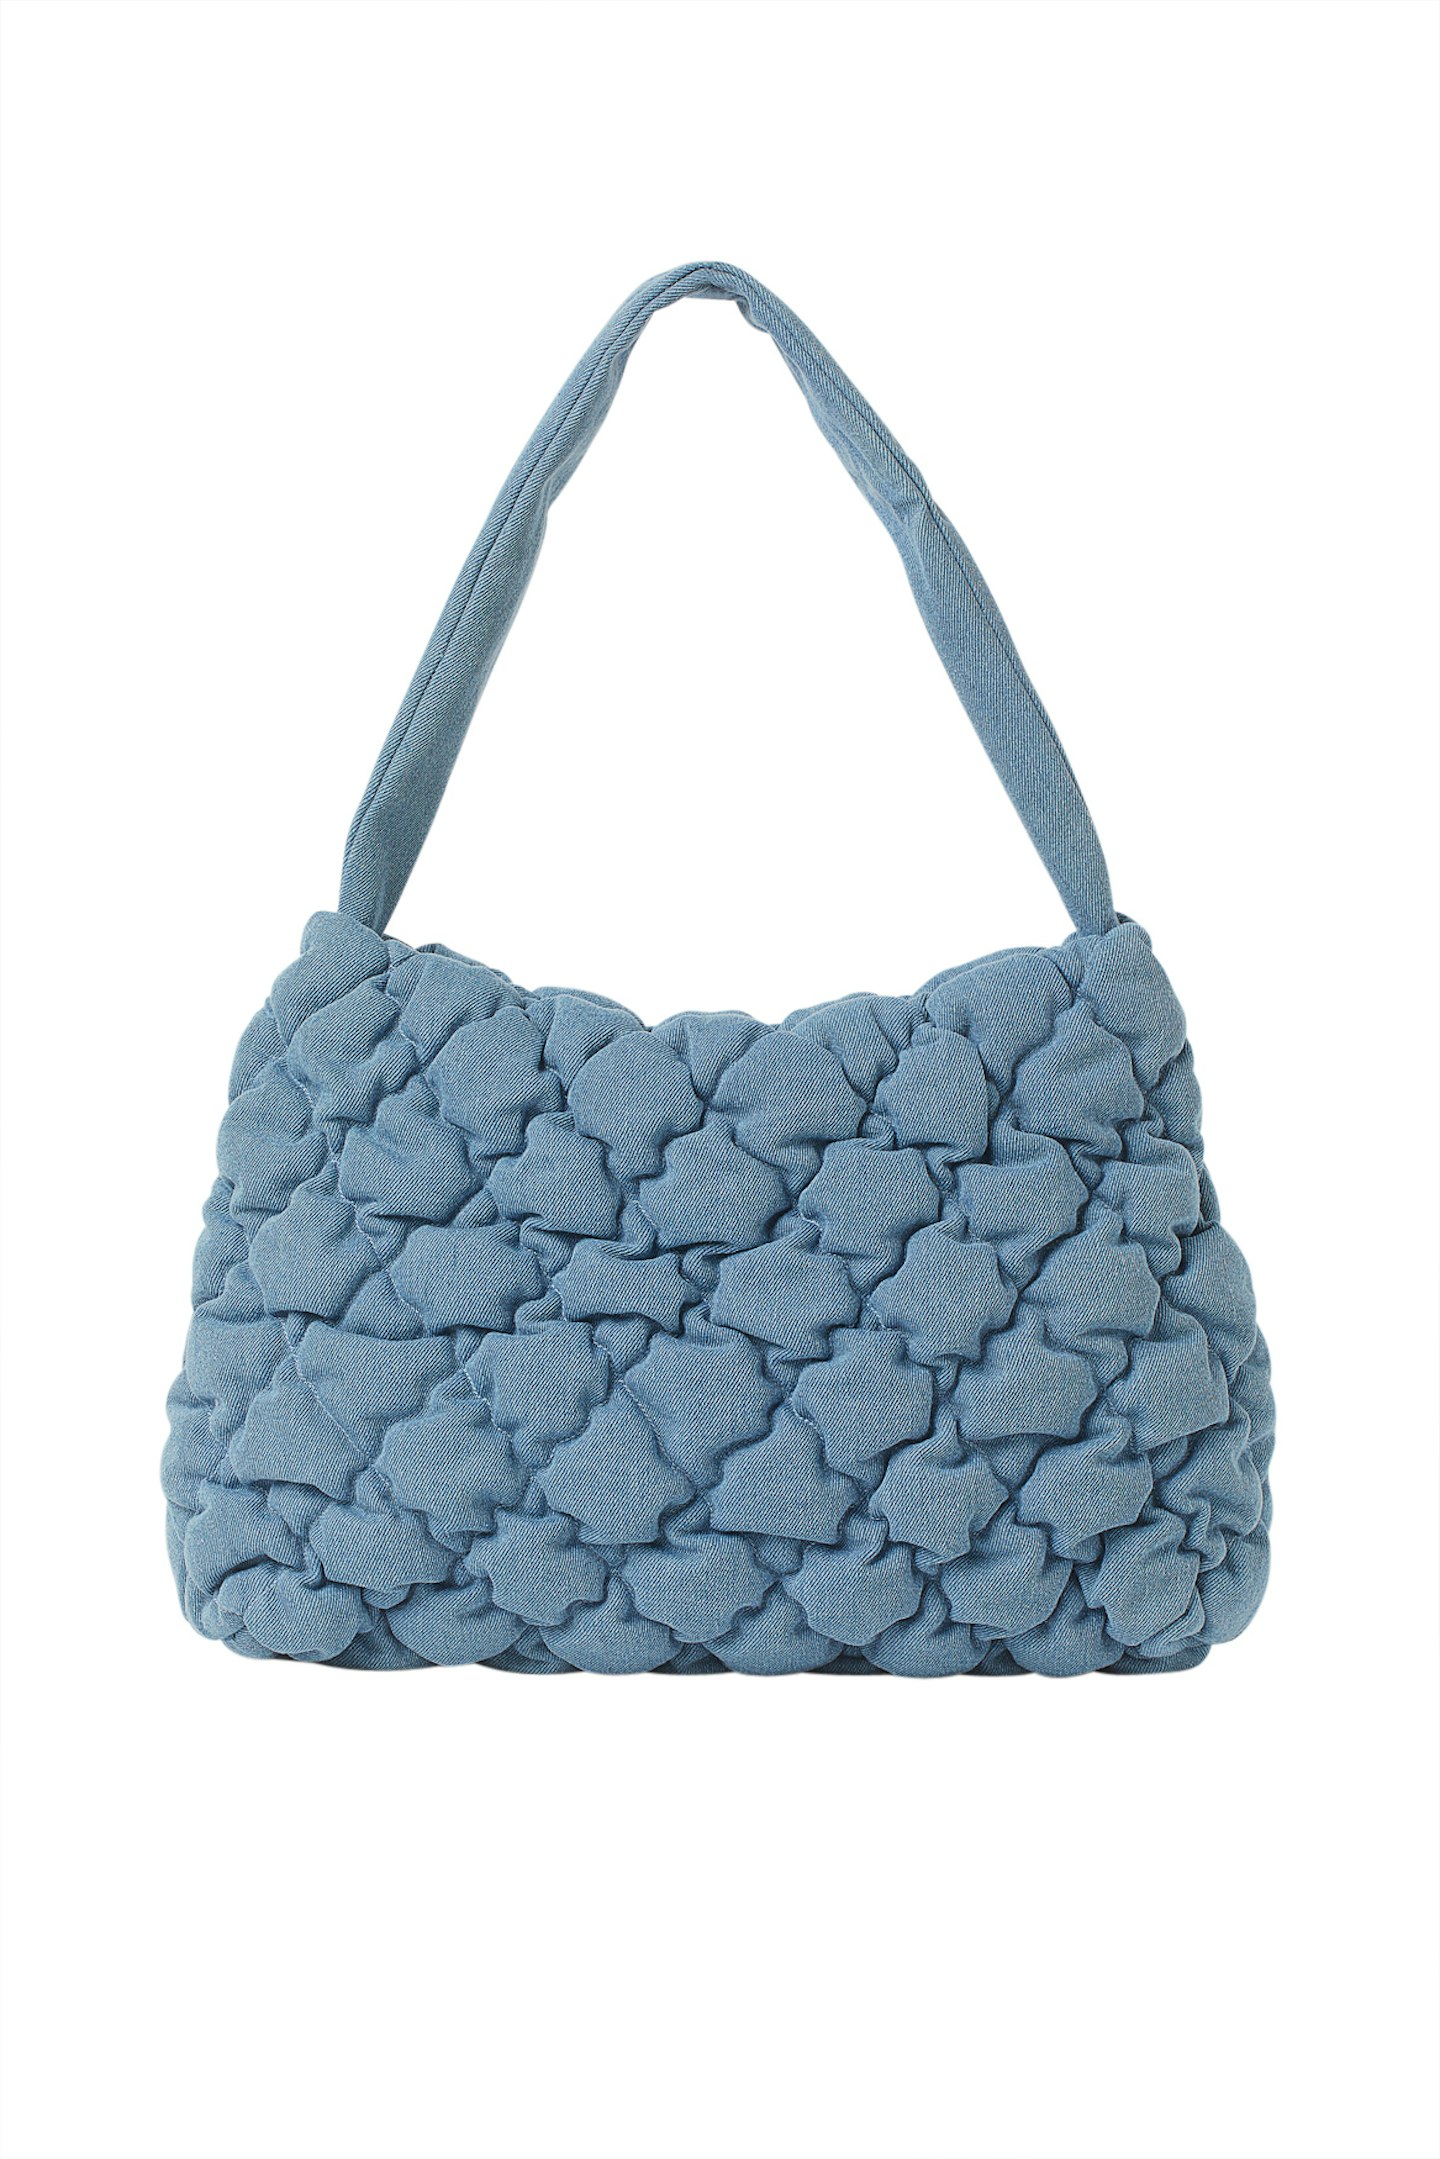 Quilted Bag, £24.99